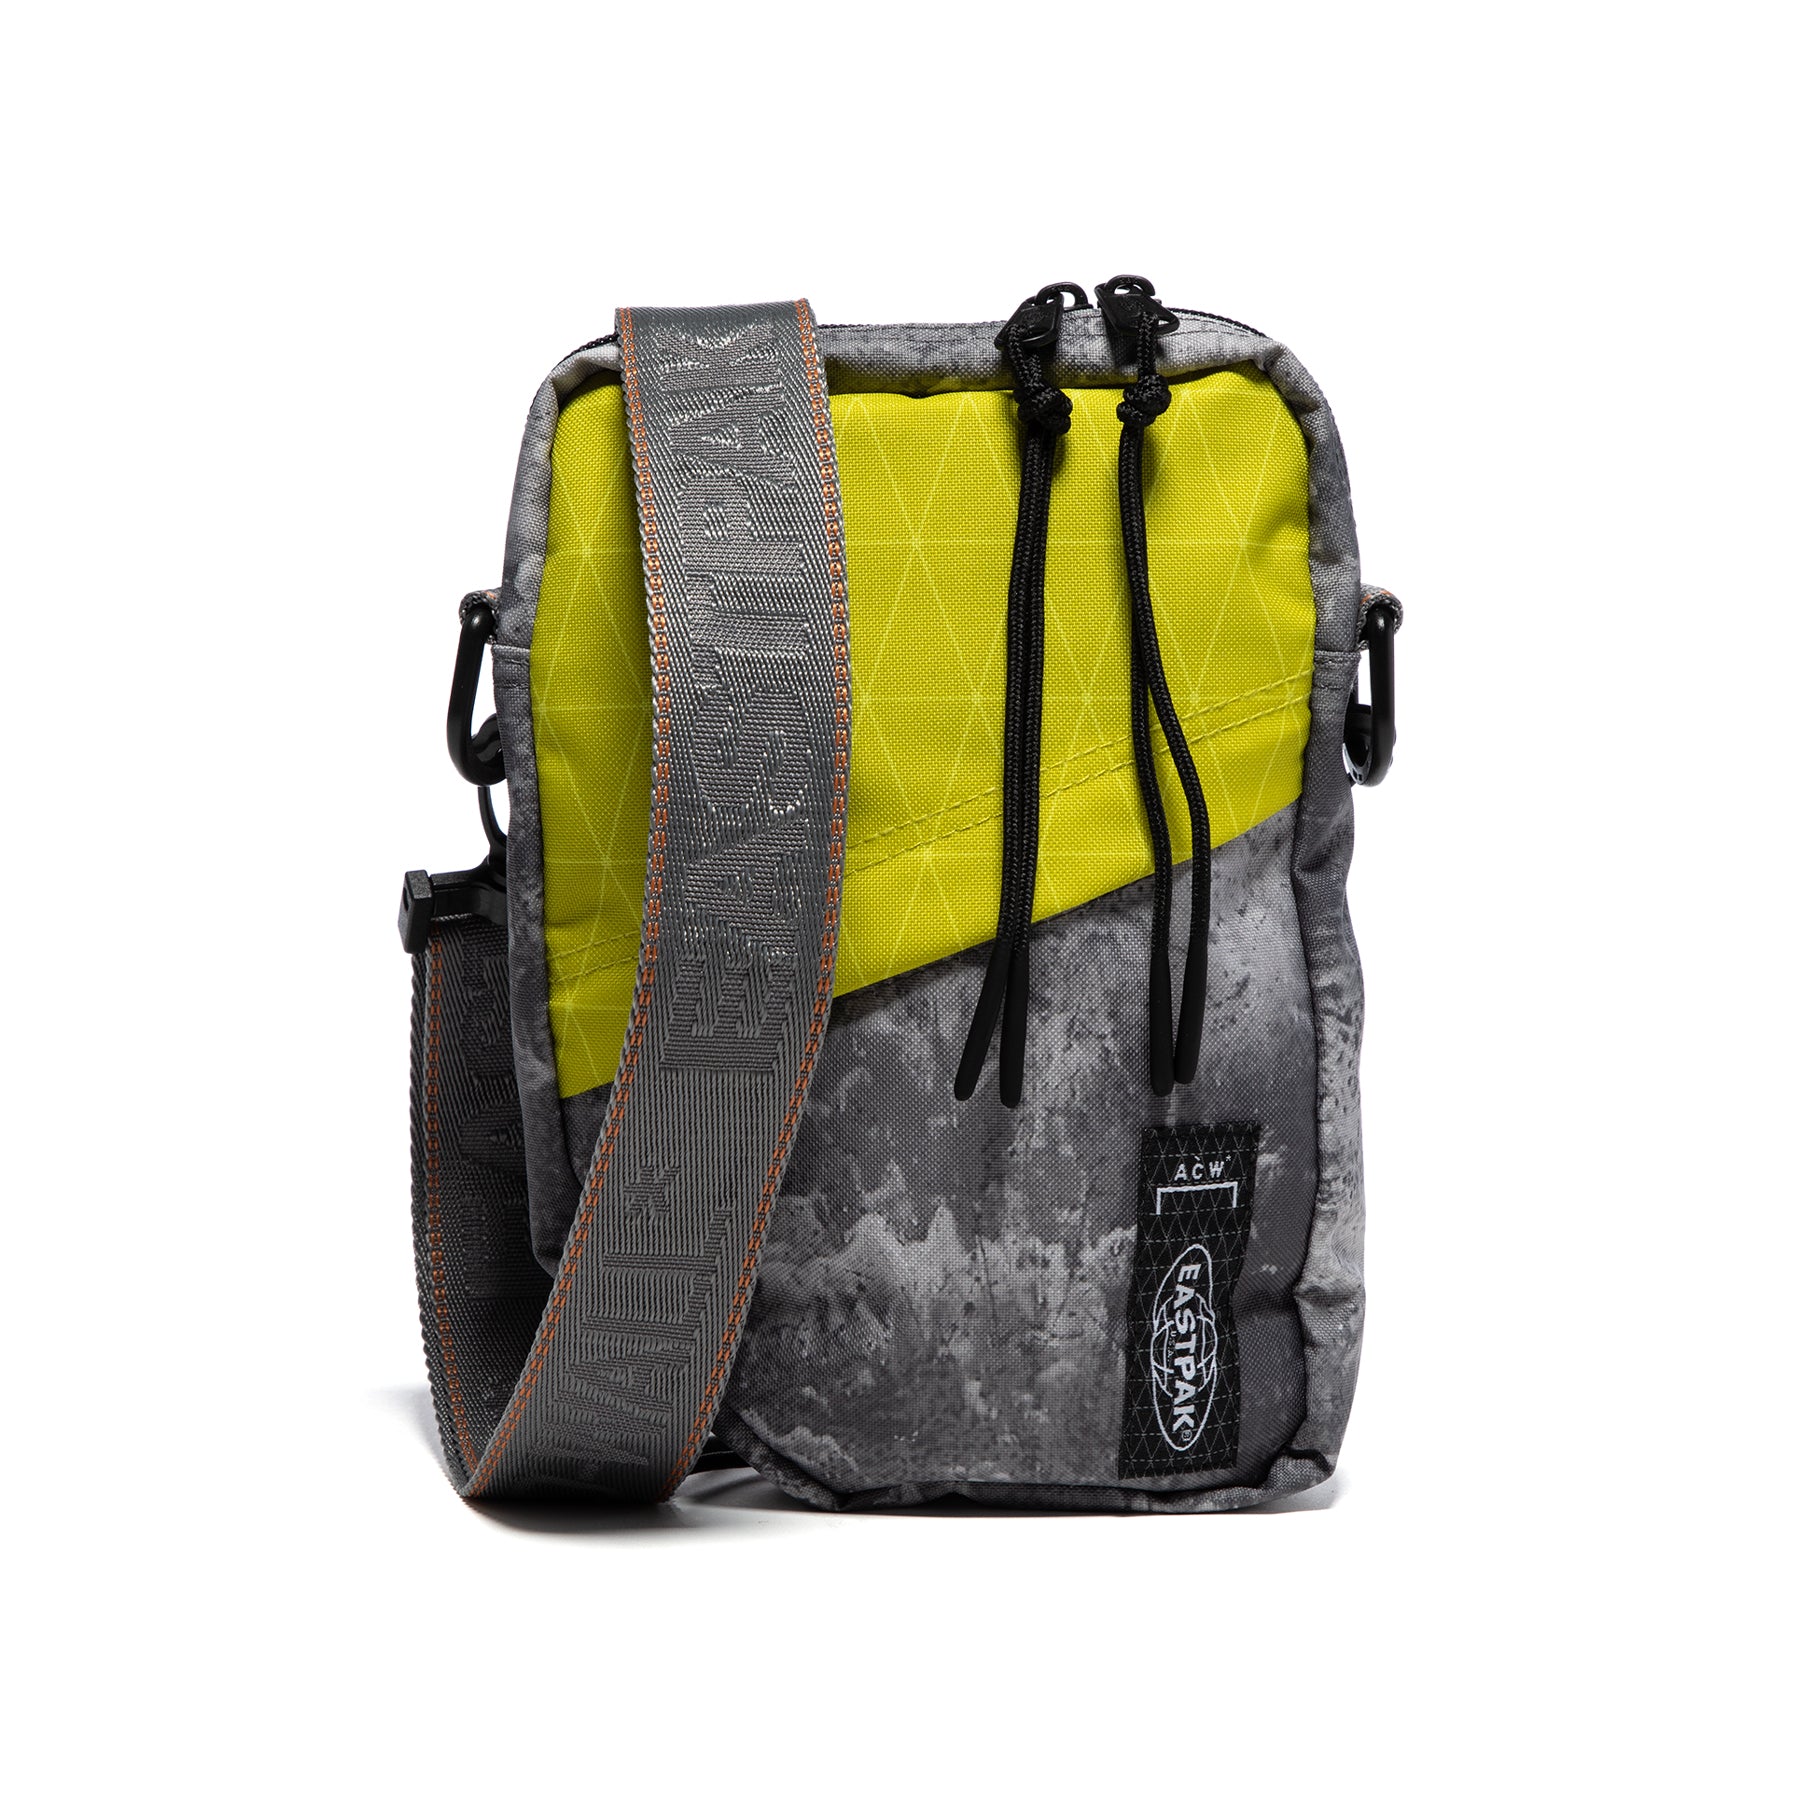 String string Karu ontsnappen A-COLD-WALL x East Pak Crossbody Pouch (Light Grey/Lime) – Concepts